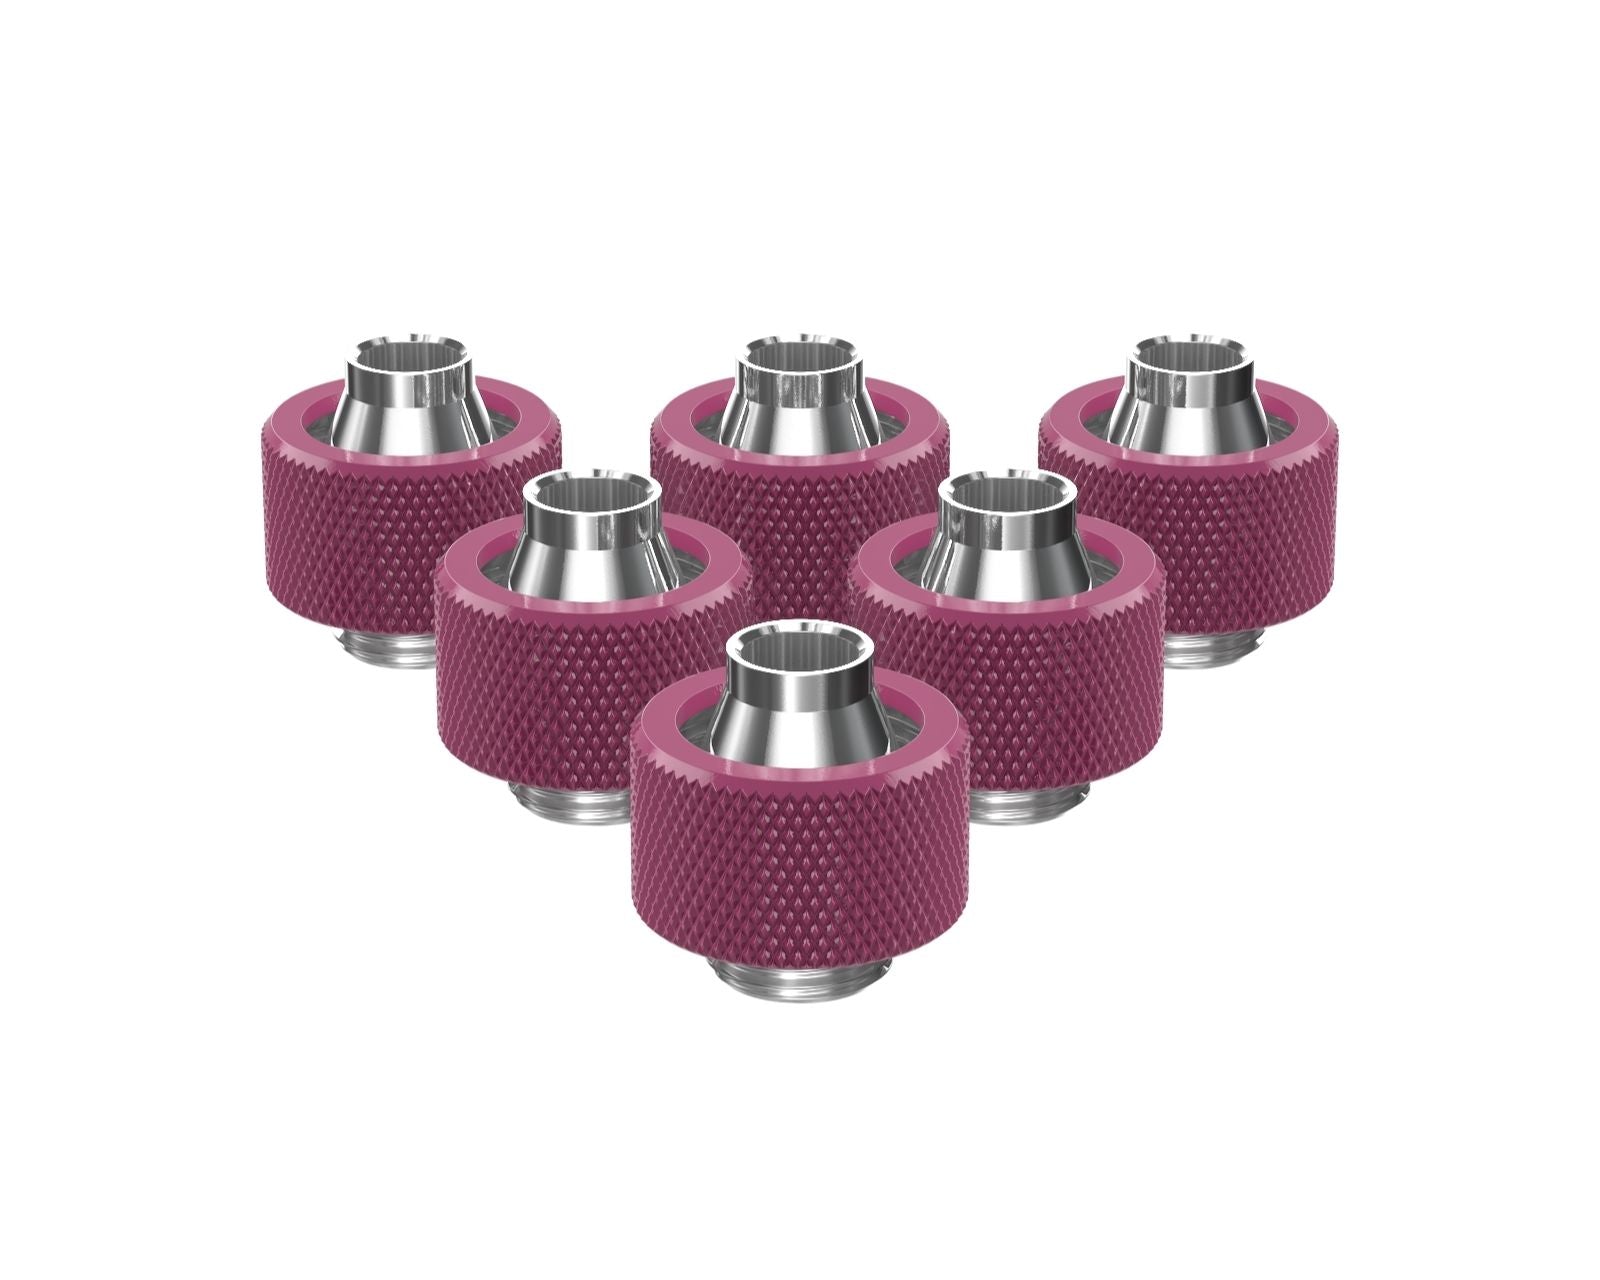 PrimoChill SecureFit SX - Premium Compression Fitting For 3/8in ID x 5/8in OD Flexible Tubing 6 Pack (F-SFSX58-6) - Available in 20+ Colors, Custom Watercooling Loop Ready - Magenta